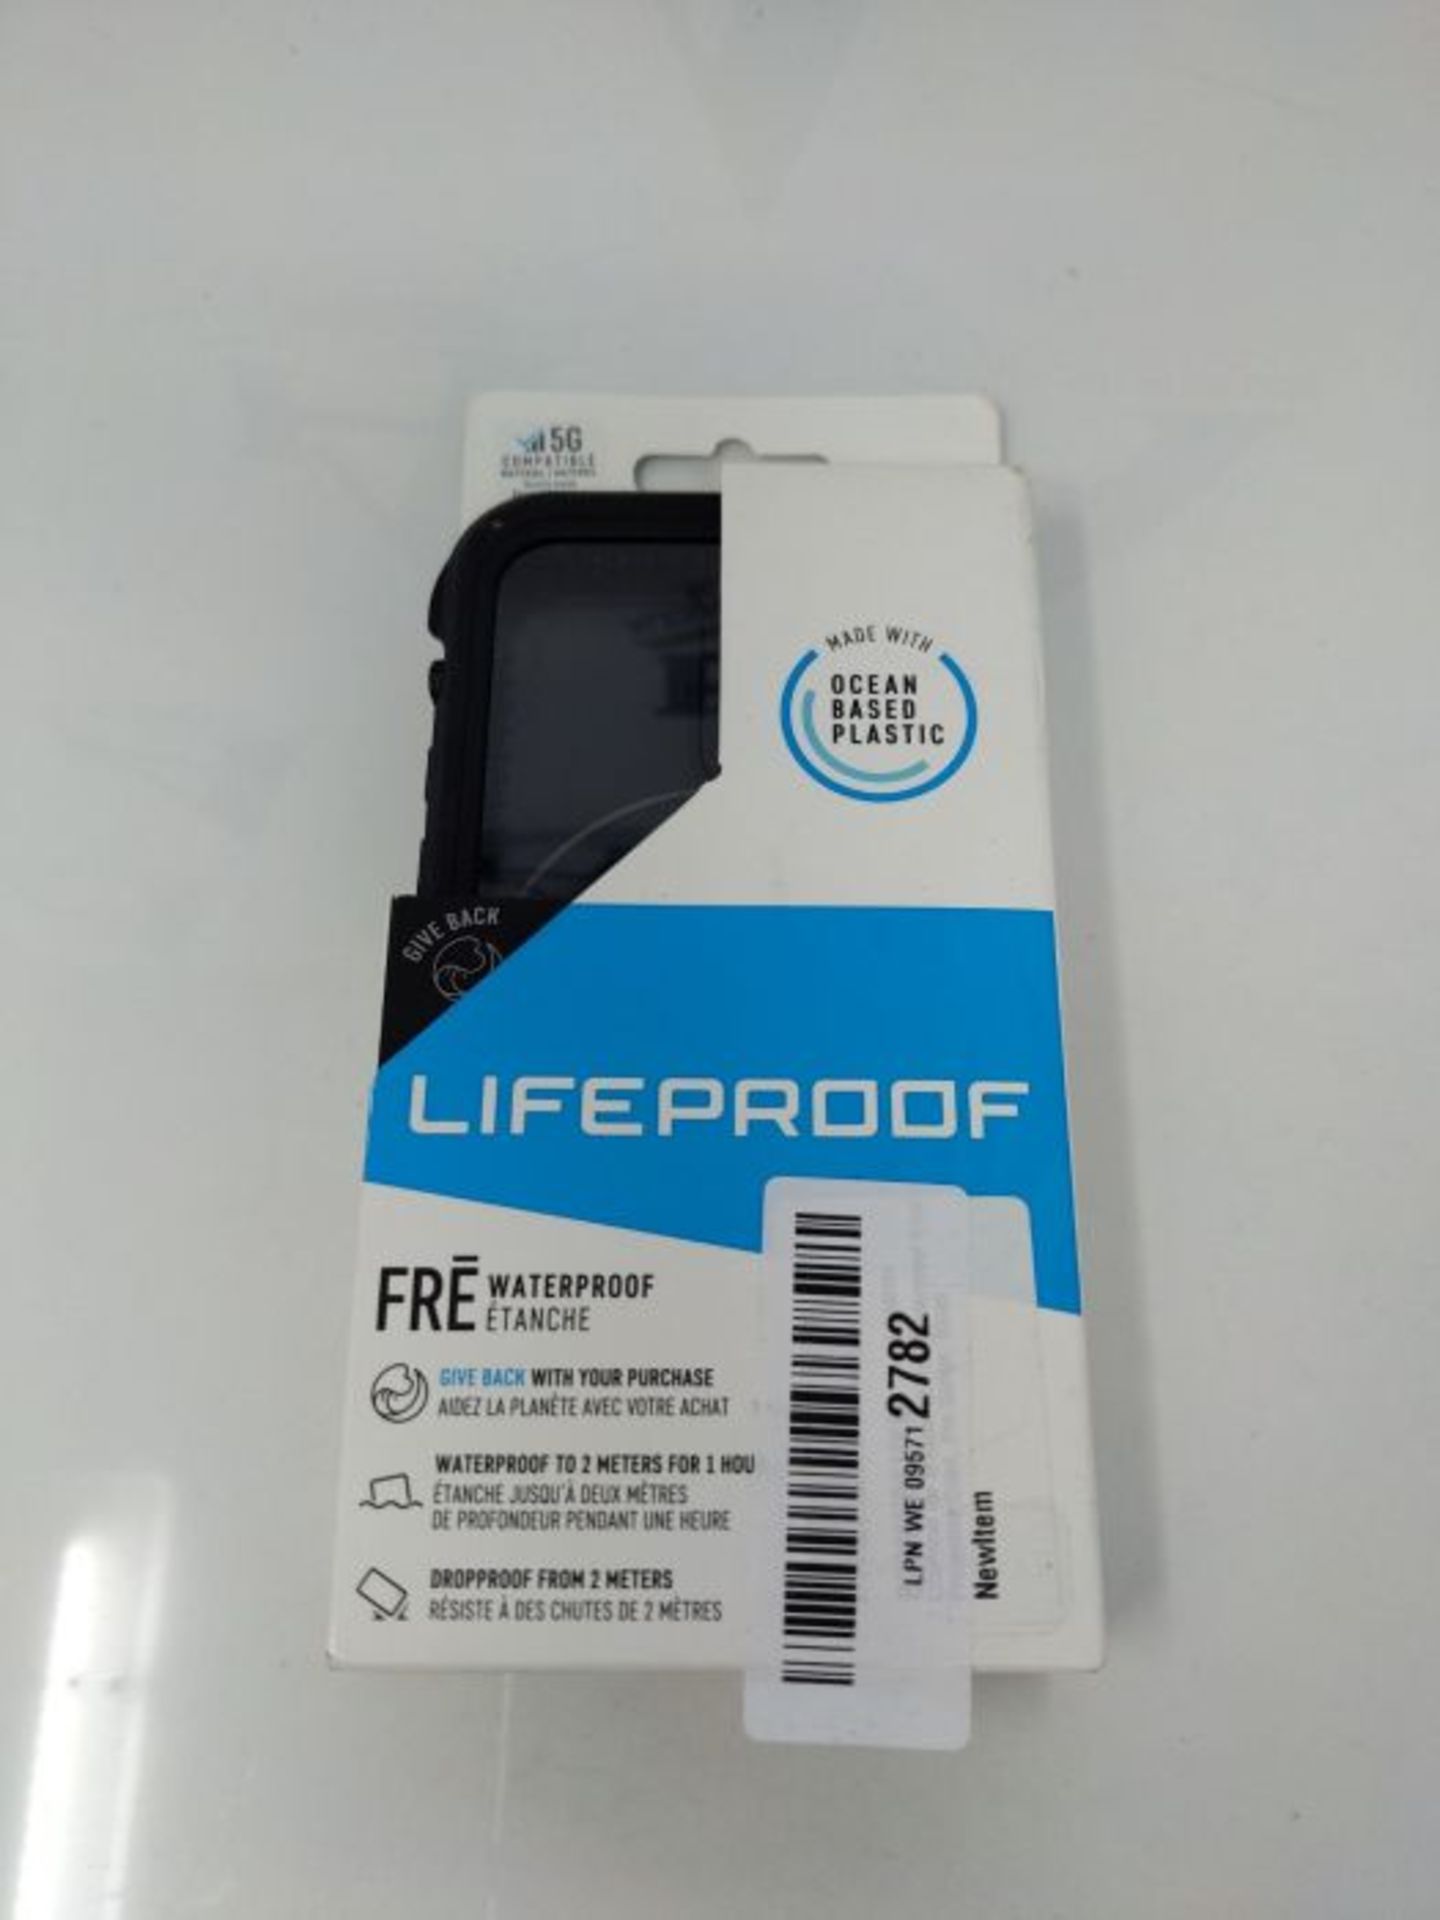 LifeProof for iPhone 12 Pro, Waterproof Drop Protective Case, Fre Series, Black - Image 5 of 6